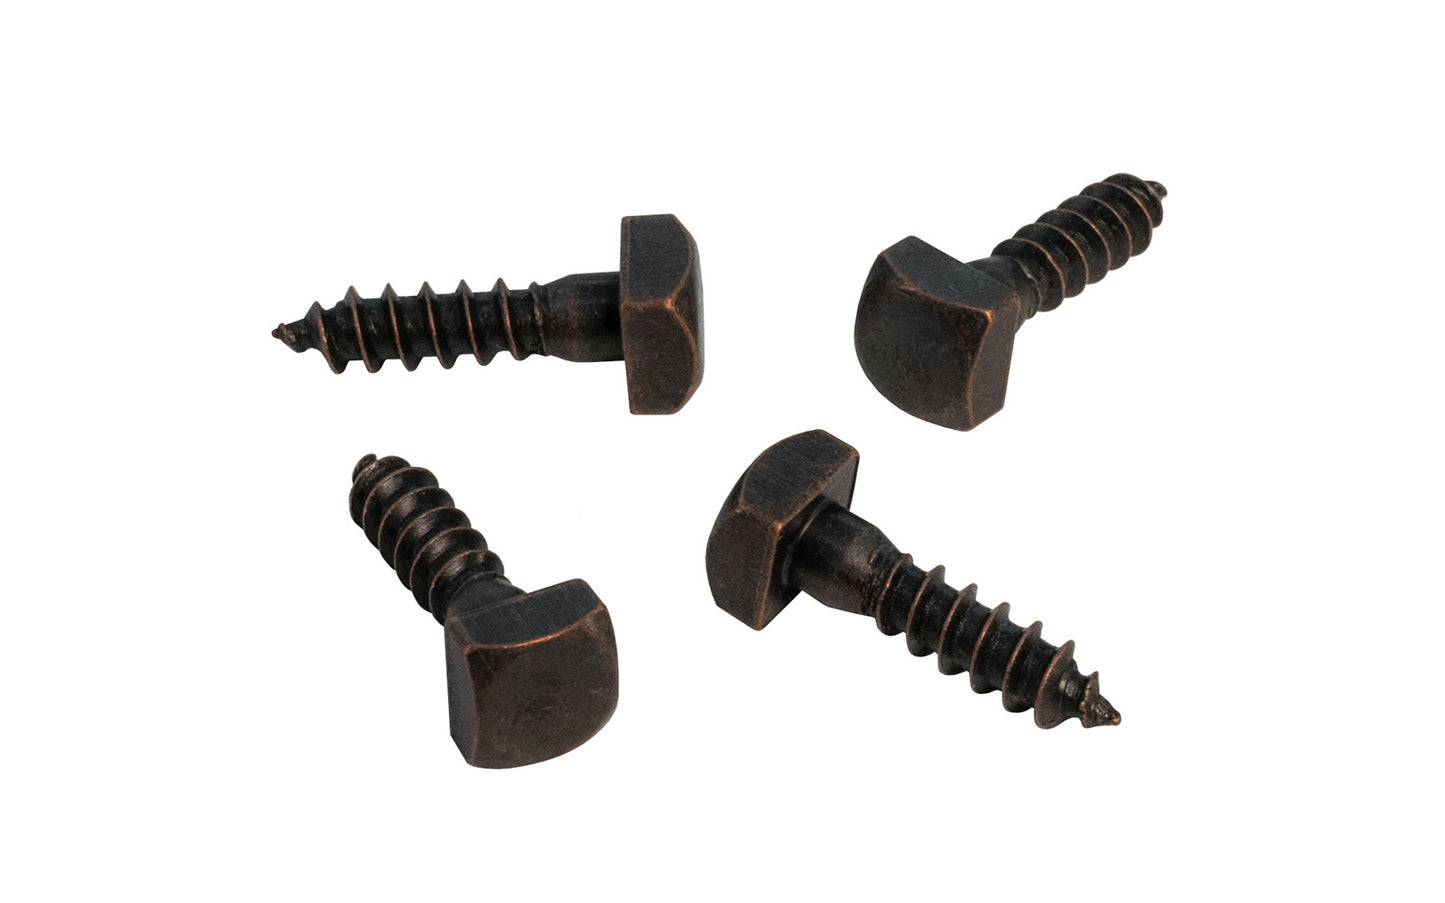 Square head screws in an antique copper finish. Great screws for or Mission or Arts & Crafts style hardware. Traditional & classic vintage-style wood screws. 4 PCS in bag. 4 PCS in bag. 3/4" overall length screw. 5/16" x 5/16" size square head. 848096000173. Dark antique copper finish